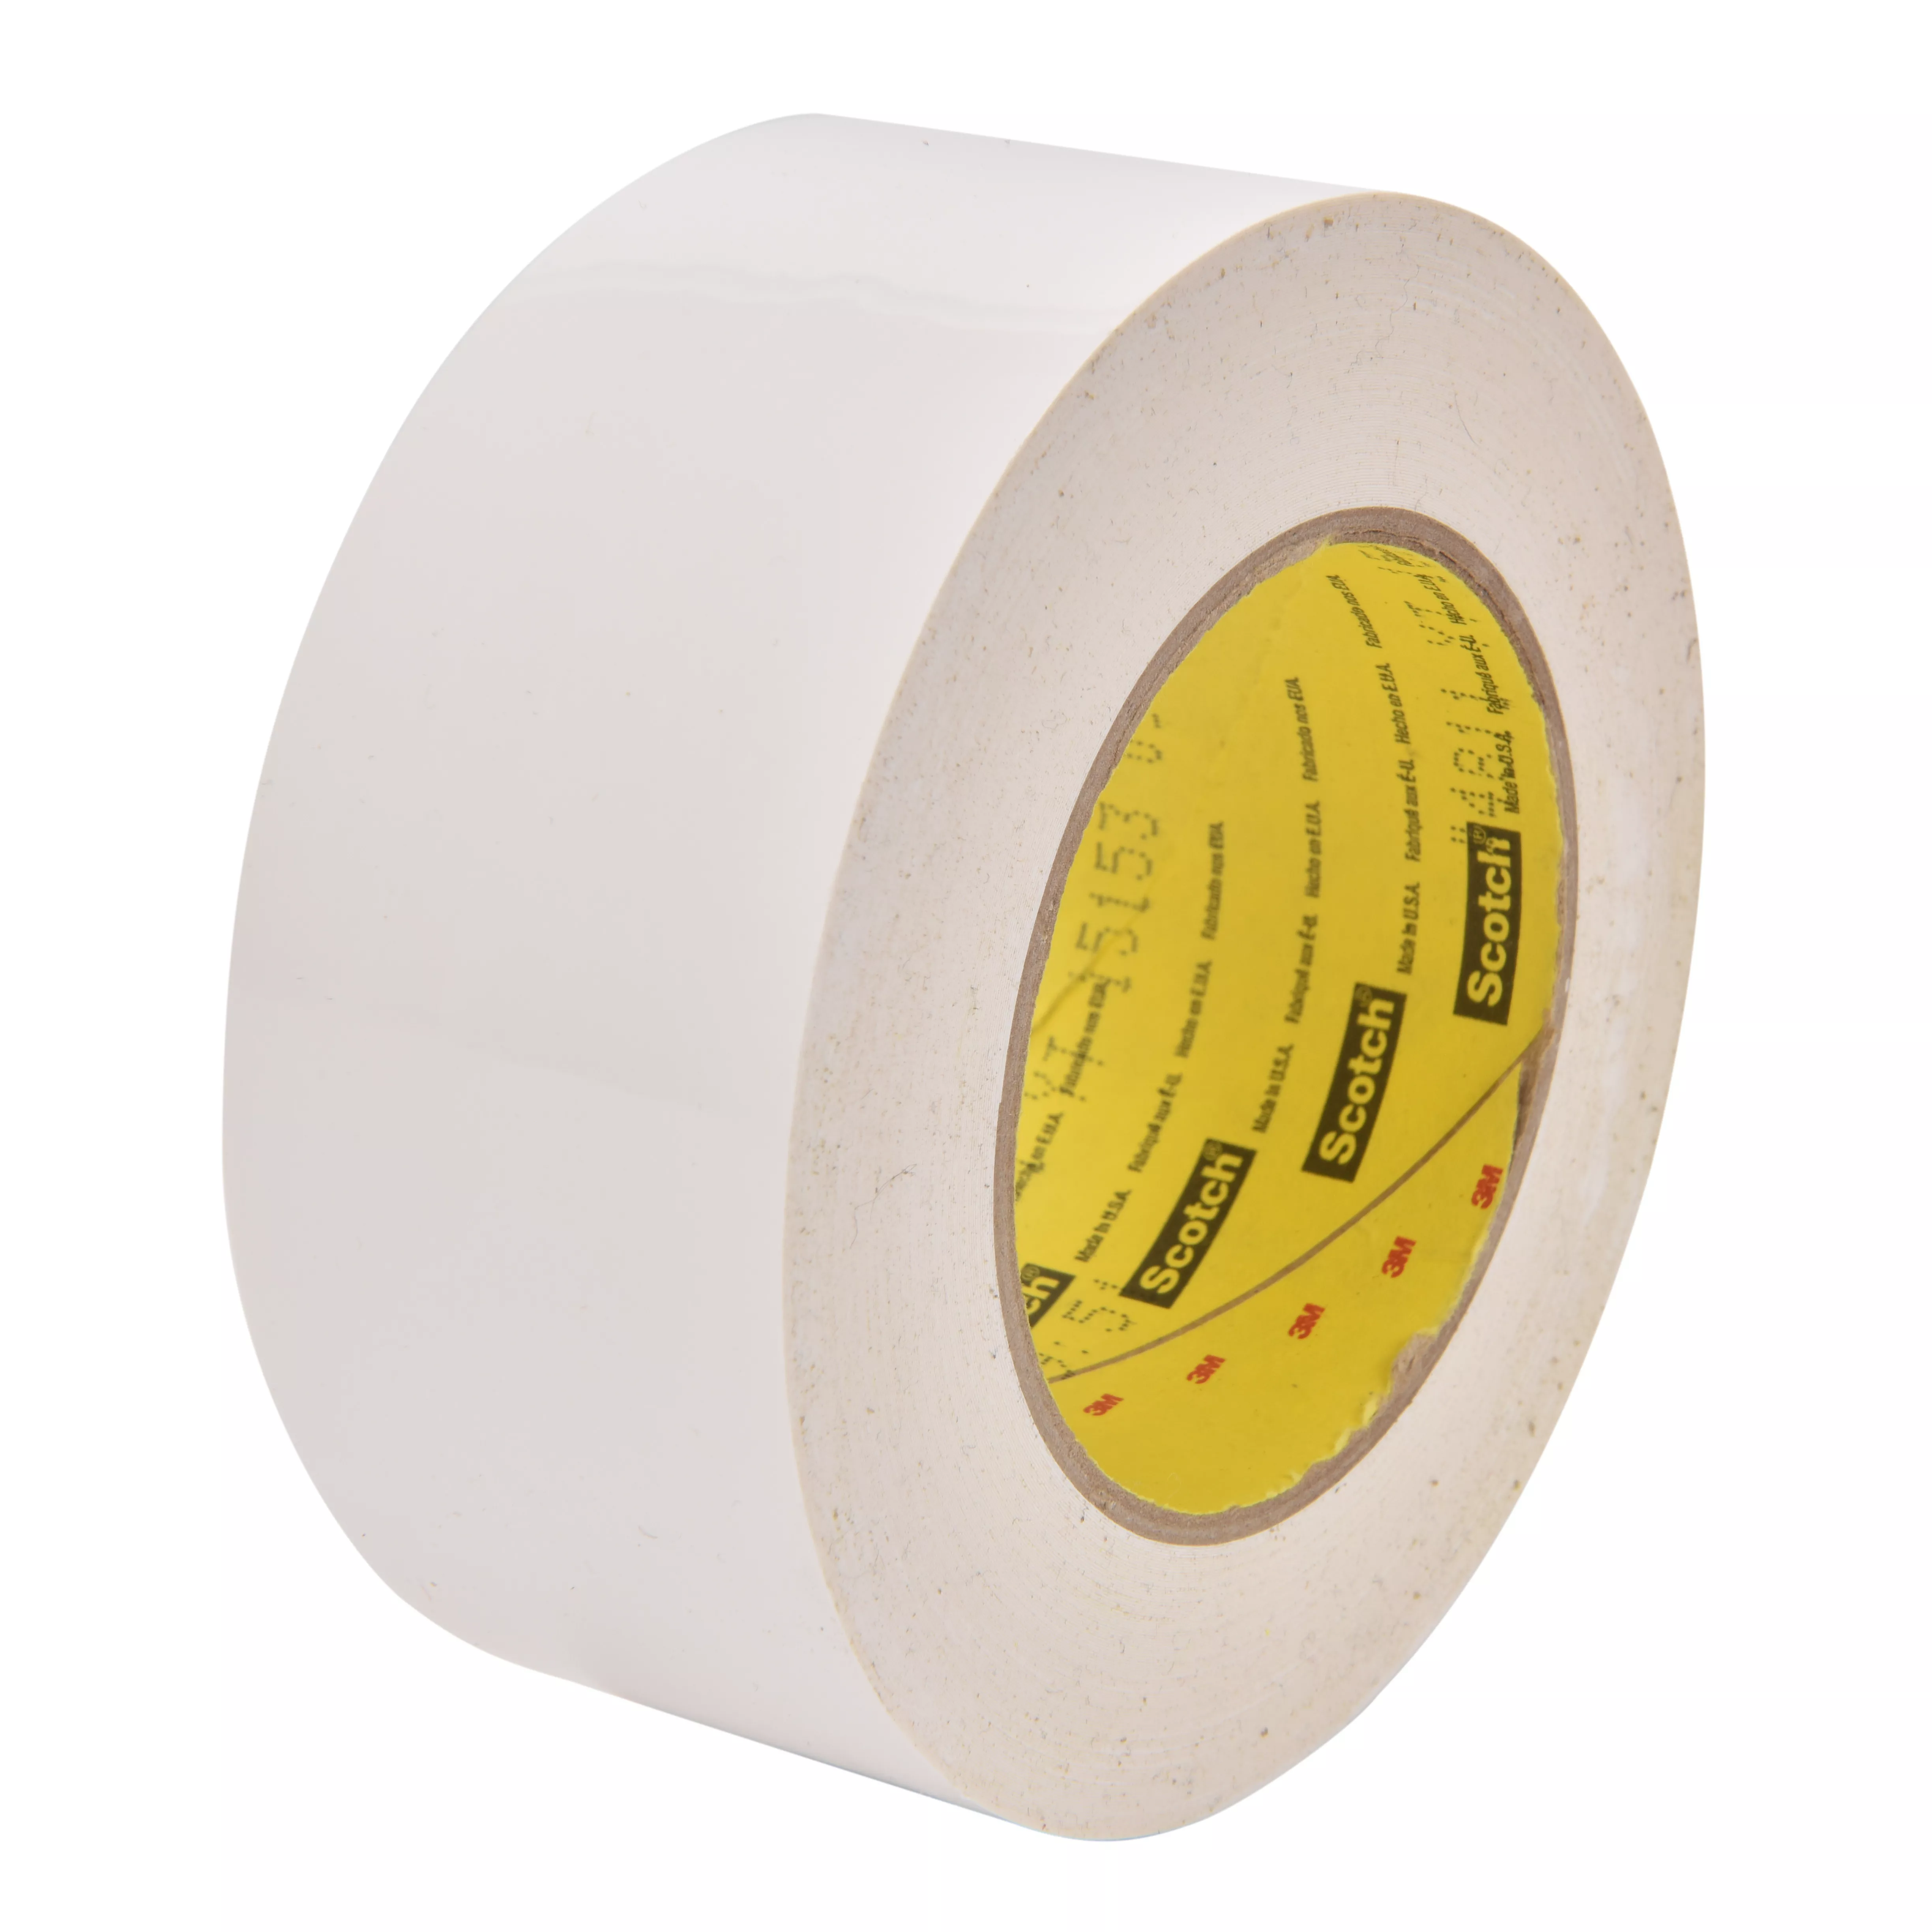 3M™ Preservation Sealing Tape 4811, White, 4 in x 36 yd, 9.5 mil, 12
Roll/Case